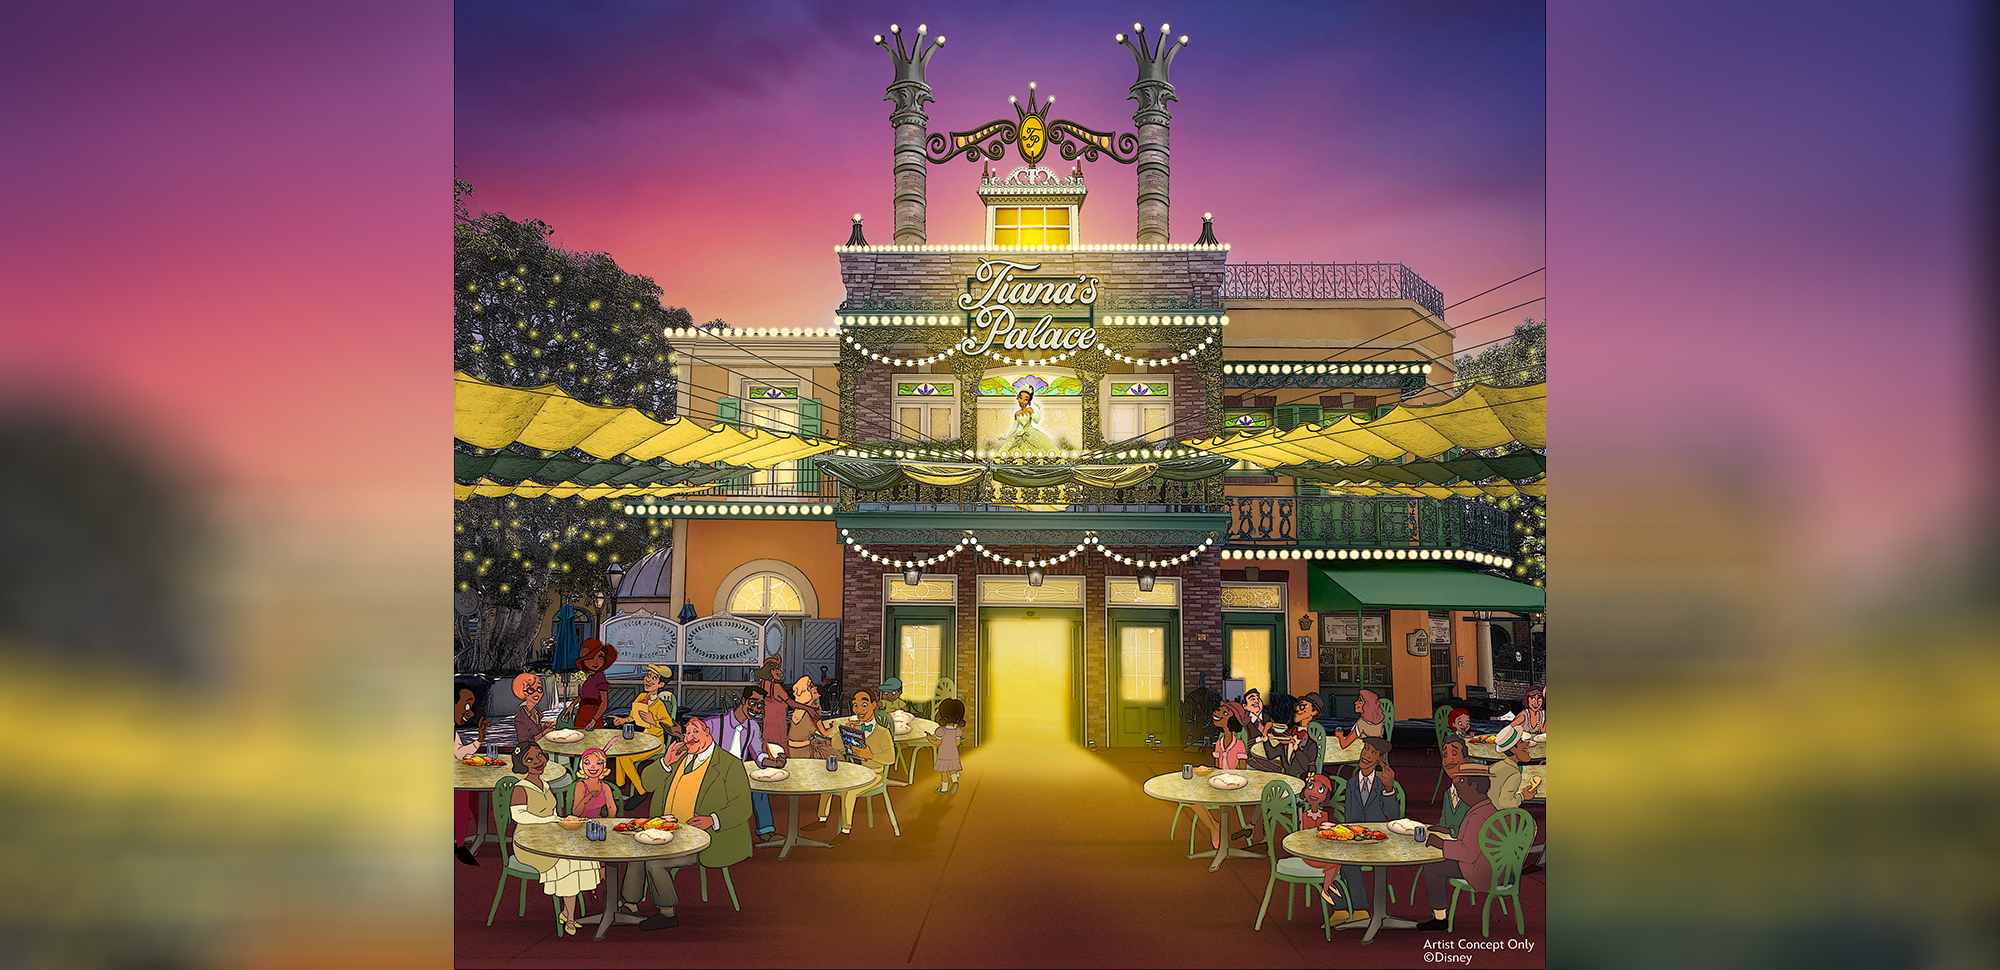 PHOTO: Tiana's palace coming to Disneyland in 2023.